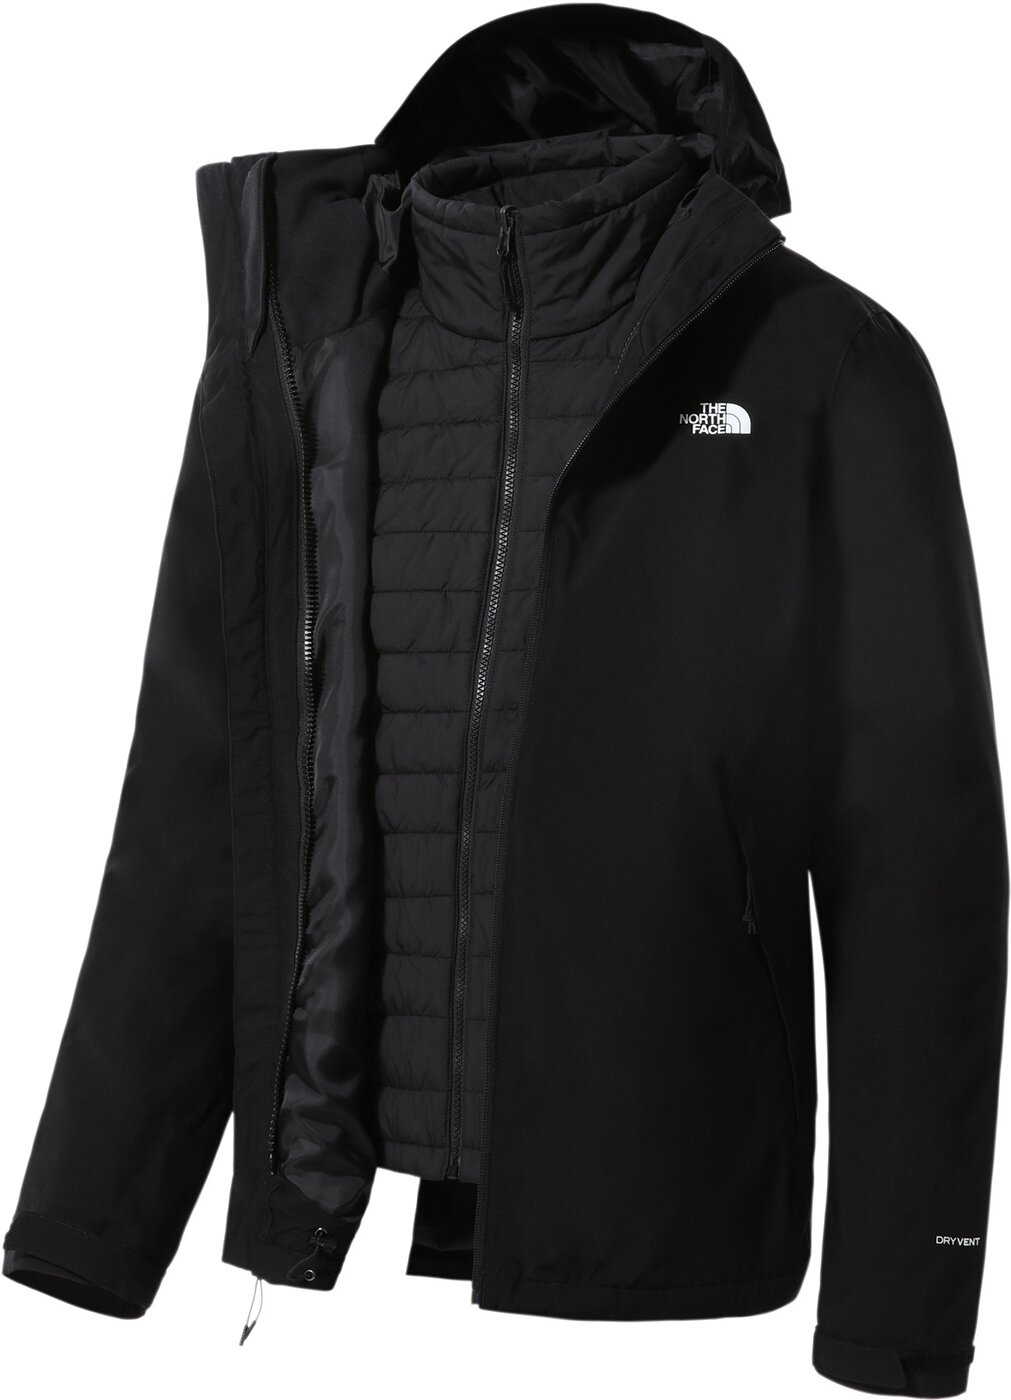 THE NORTH FACE W CARTO TRICLIMATE JACKET JK3 TNF Black online kaufen